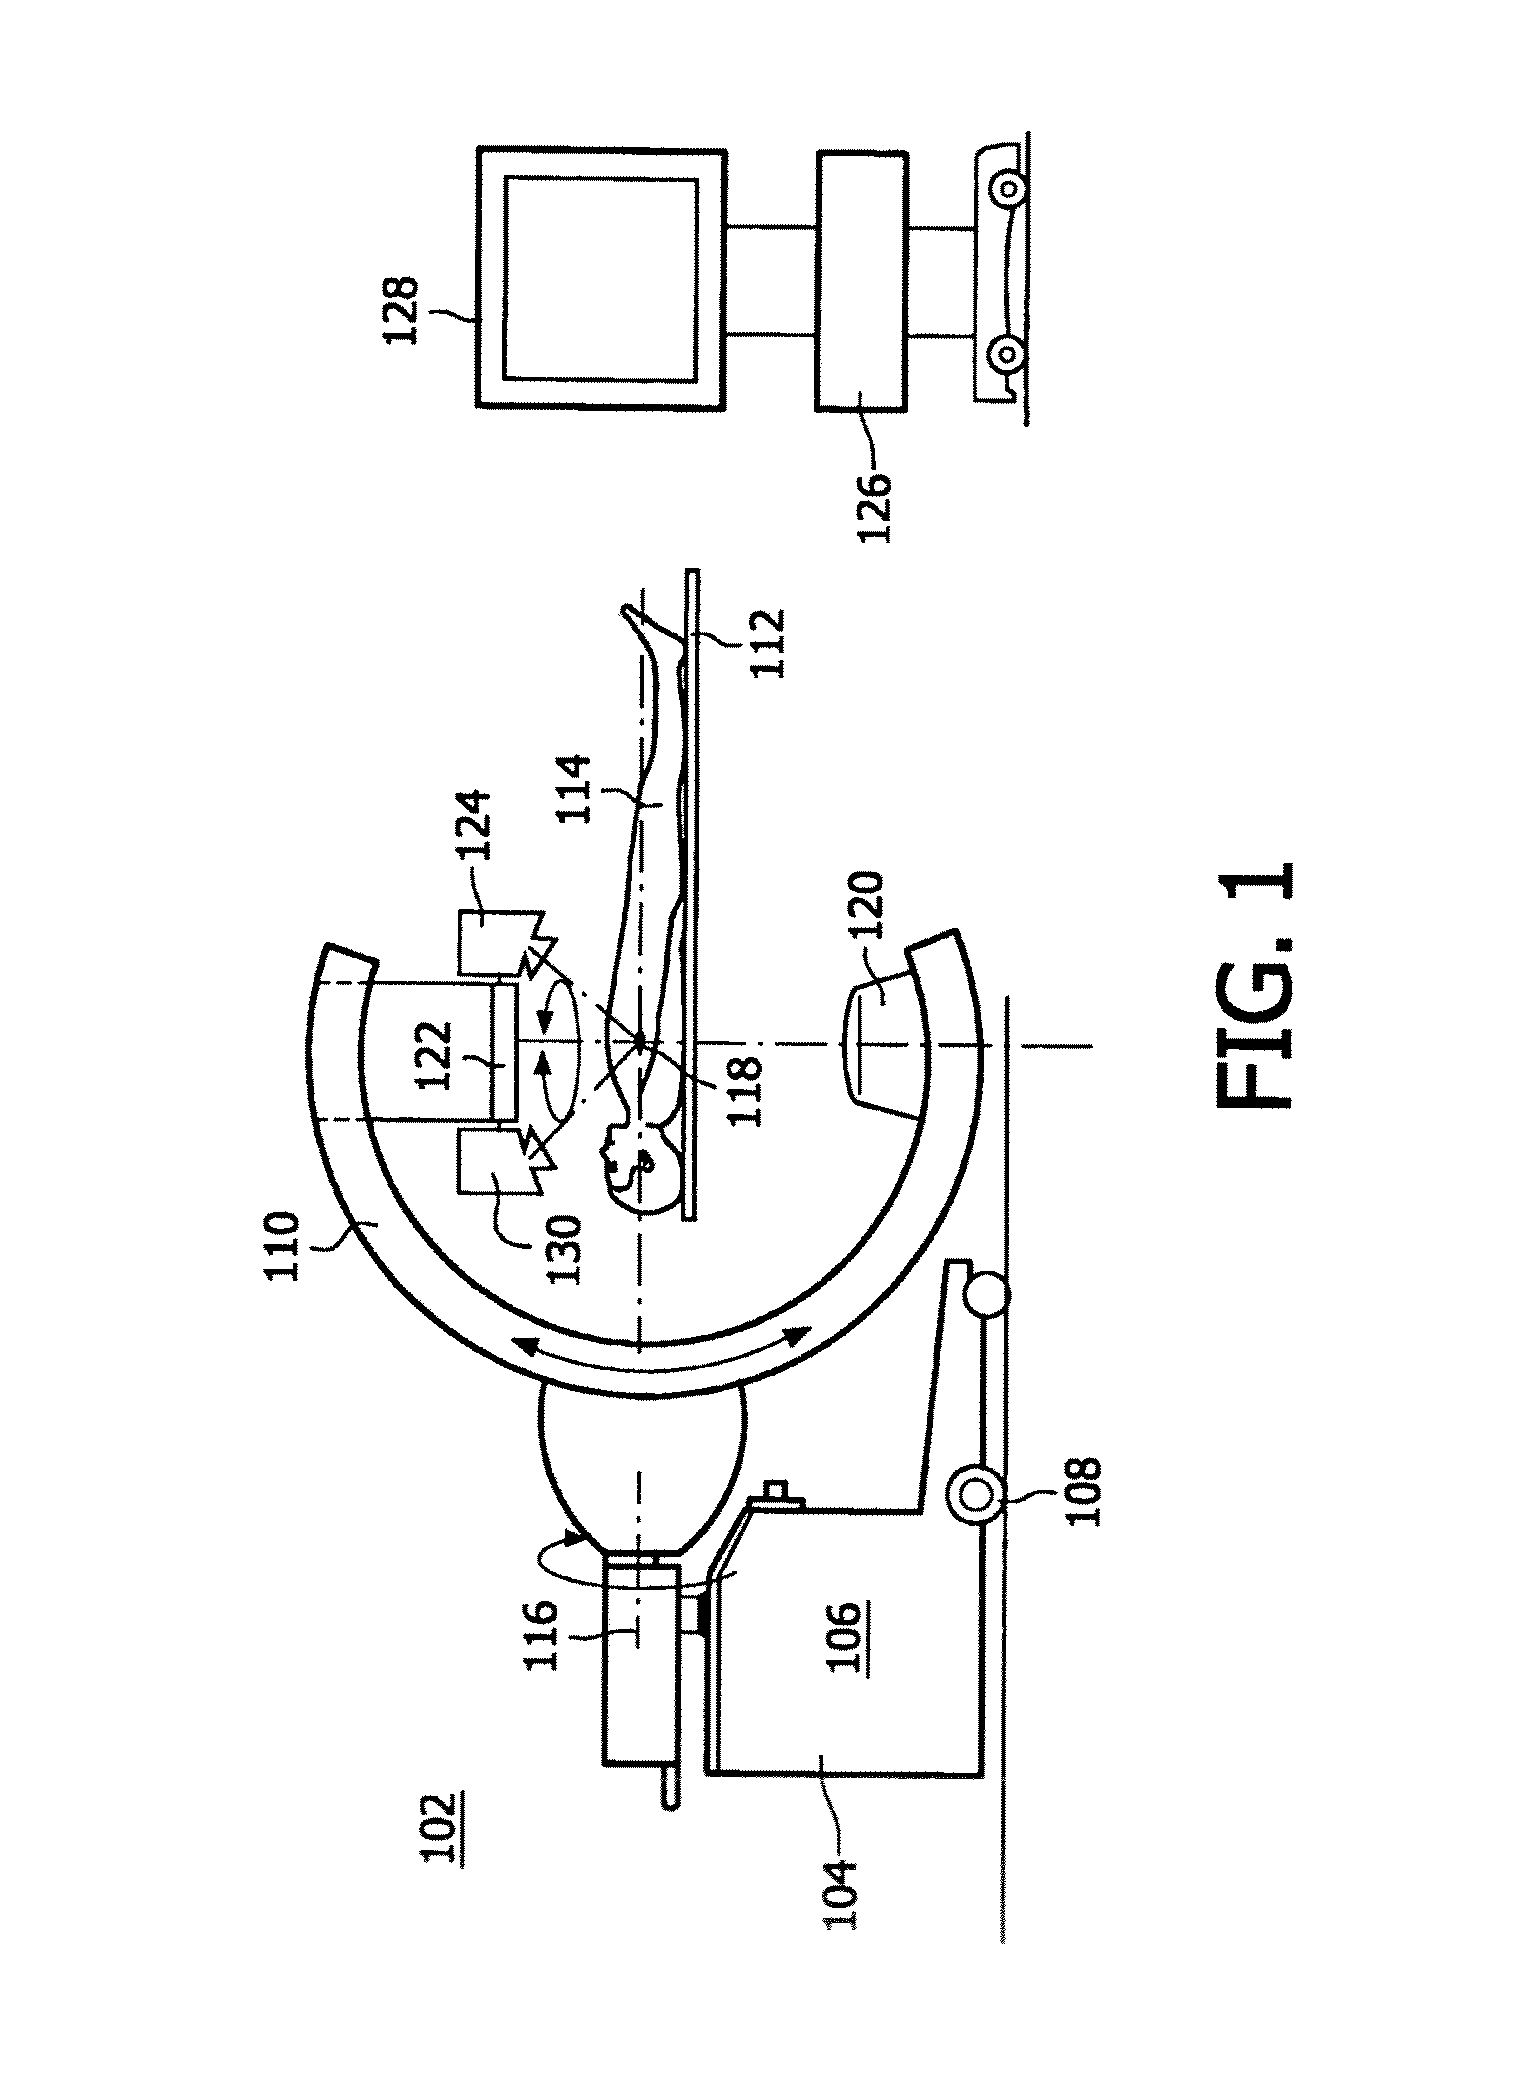 System and method for generating images of a patient's interior and exterior